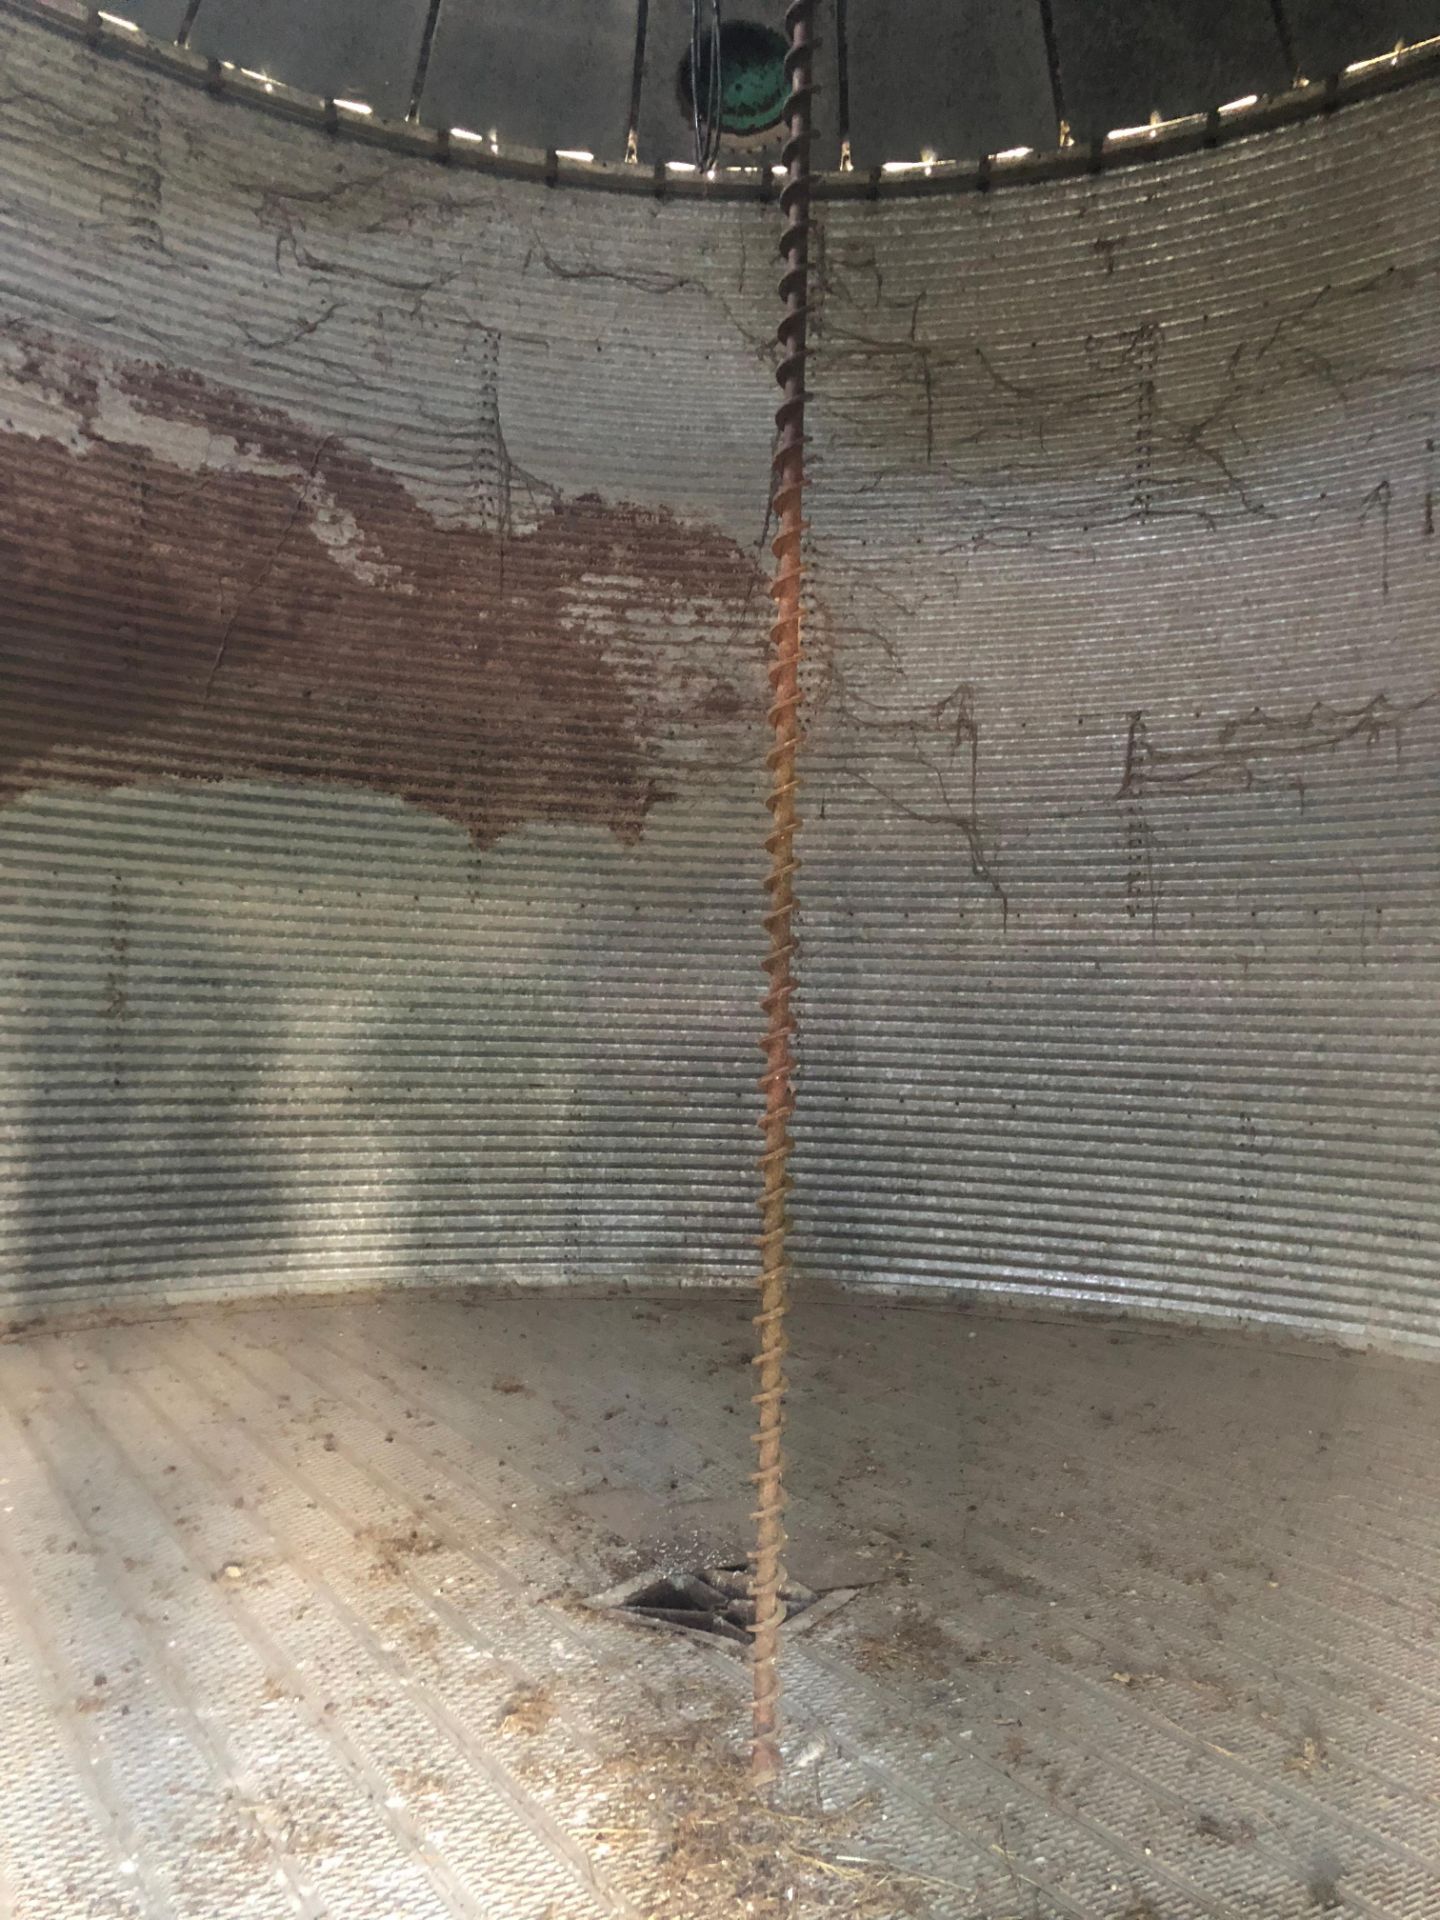 24'x6 ring Grain Bin, has to be dismantled and removed within 60 days of auction, 6" unload, - Bild 3 aus 4